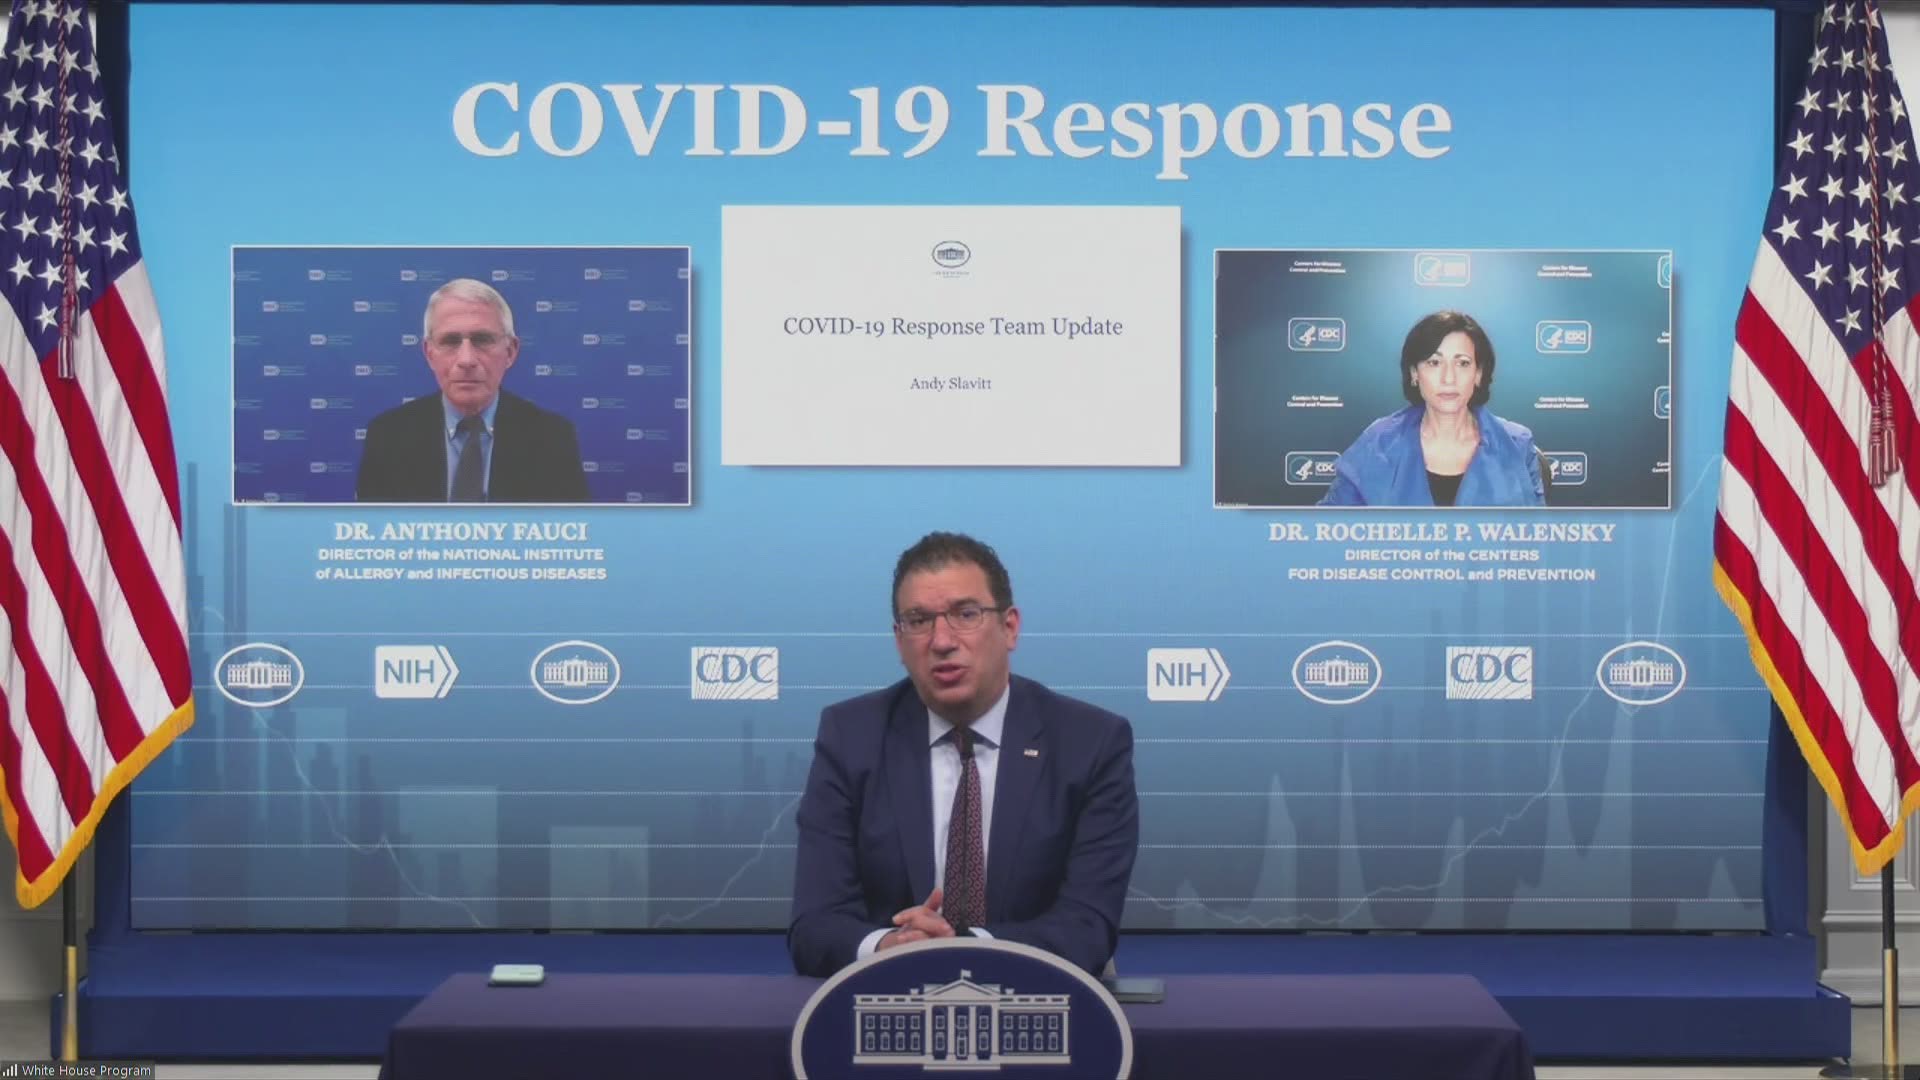 The White House COVID-19 Response Team and federal public health officials held a press briefing to provide updates on the COVID-19 response effort.